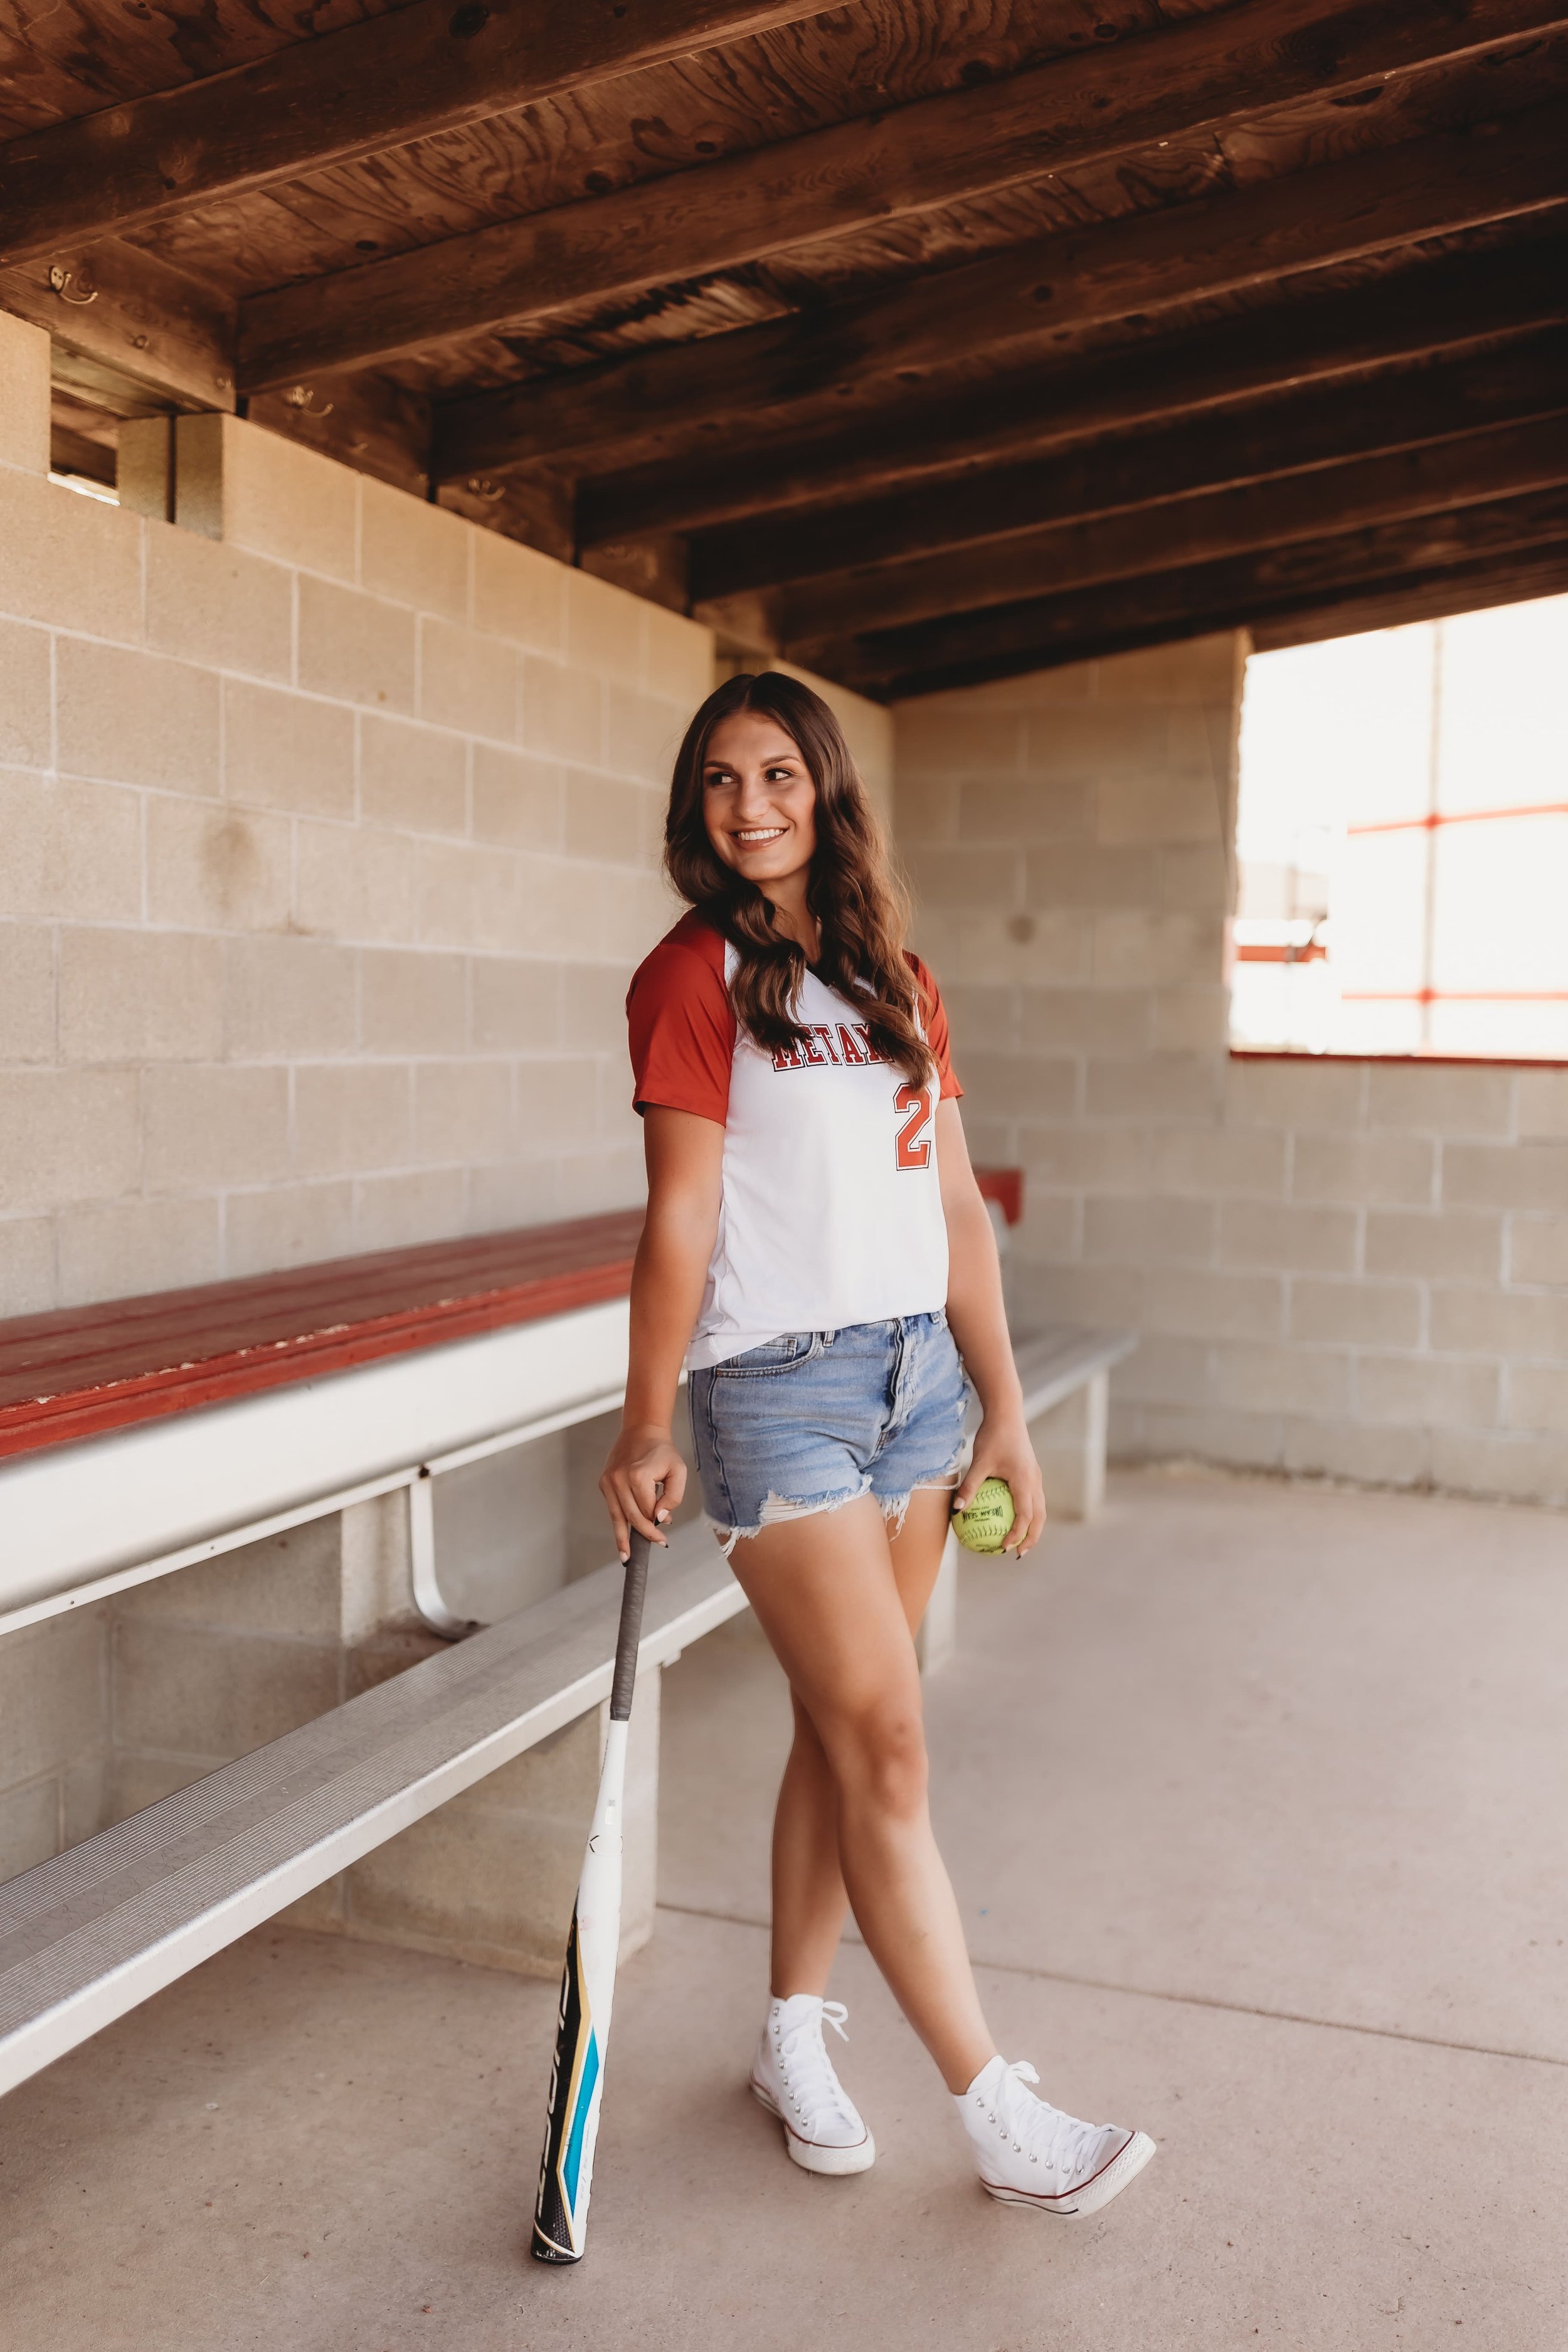  Senior softball player stands in a dugout and leans on her softball bat and smiles over her shoulder as she holds a softball senior picture ideas 